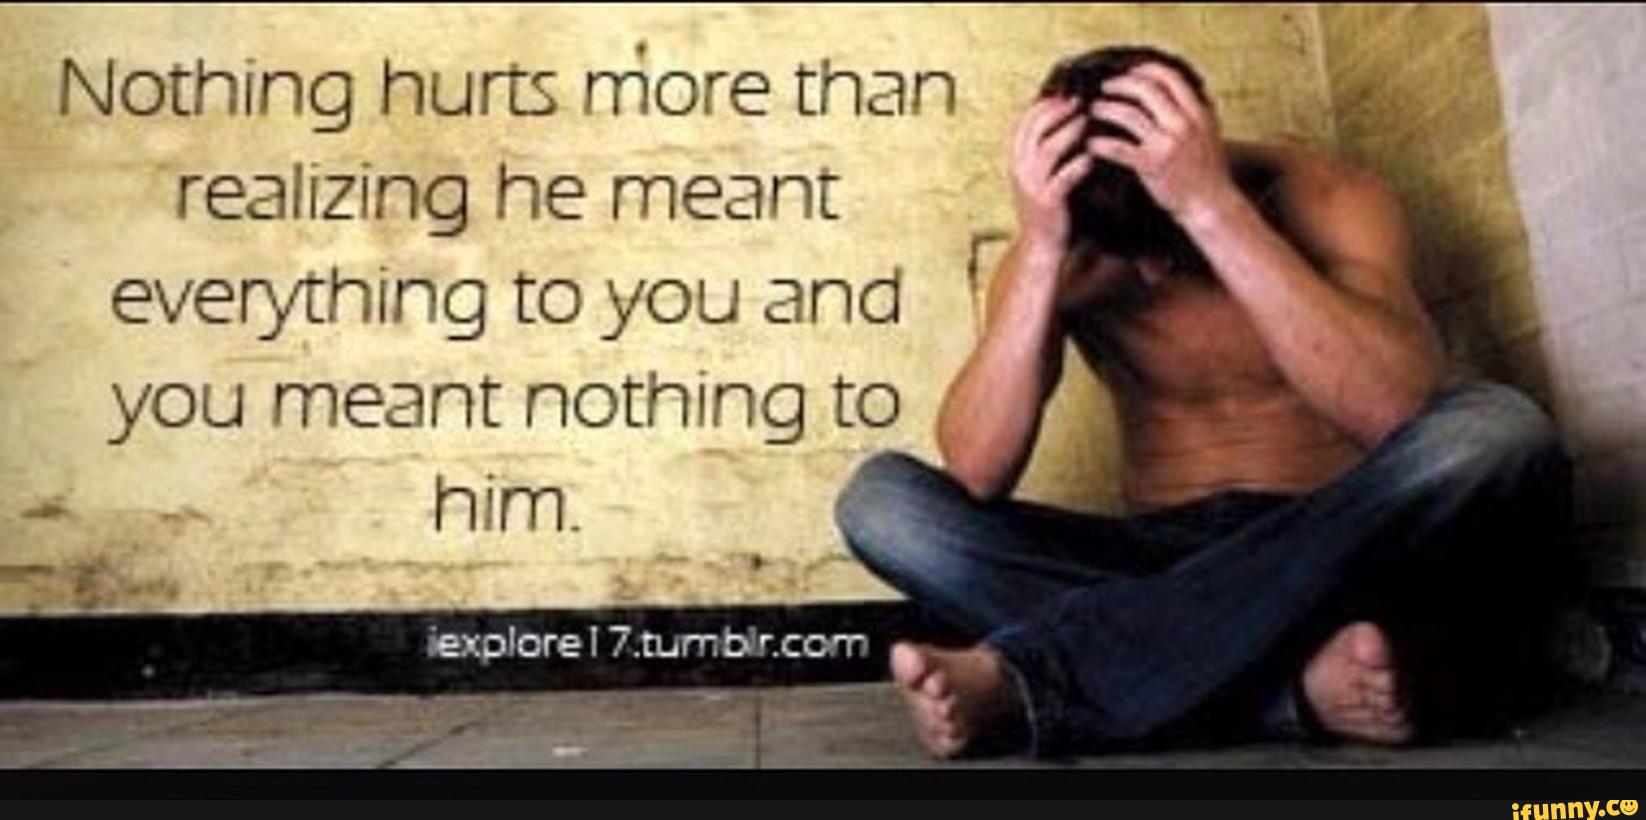 Norhmg hurts more than realizing he meant everything to you and you meant n...